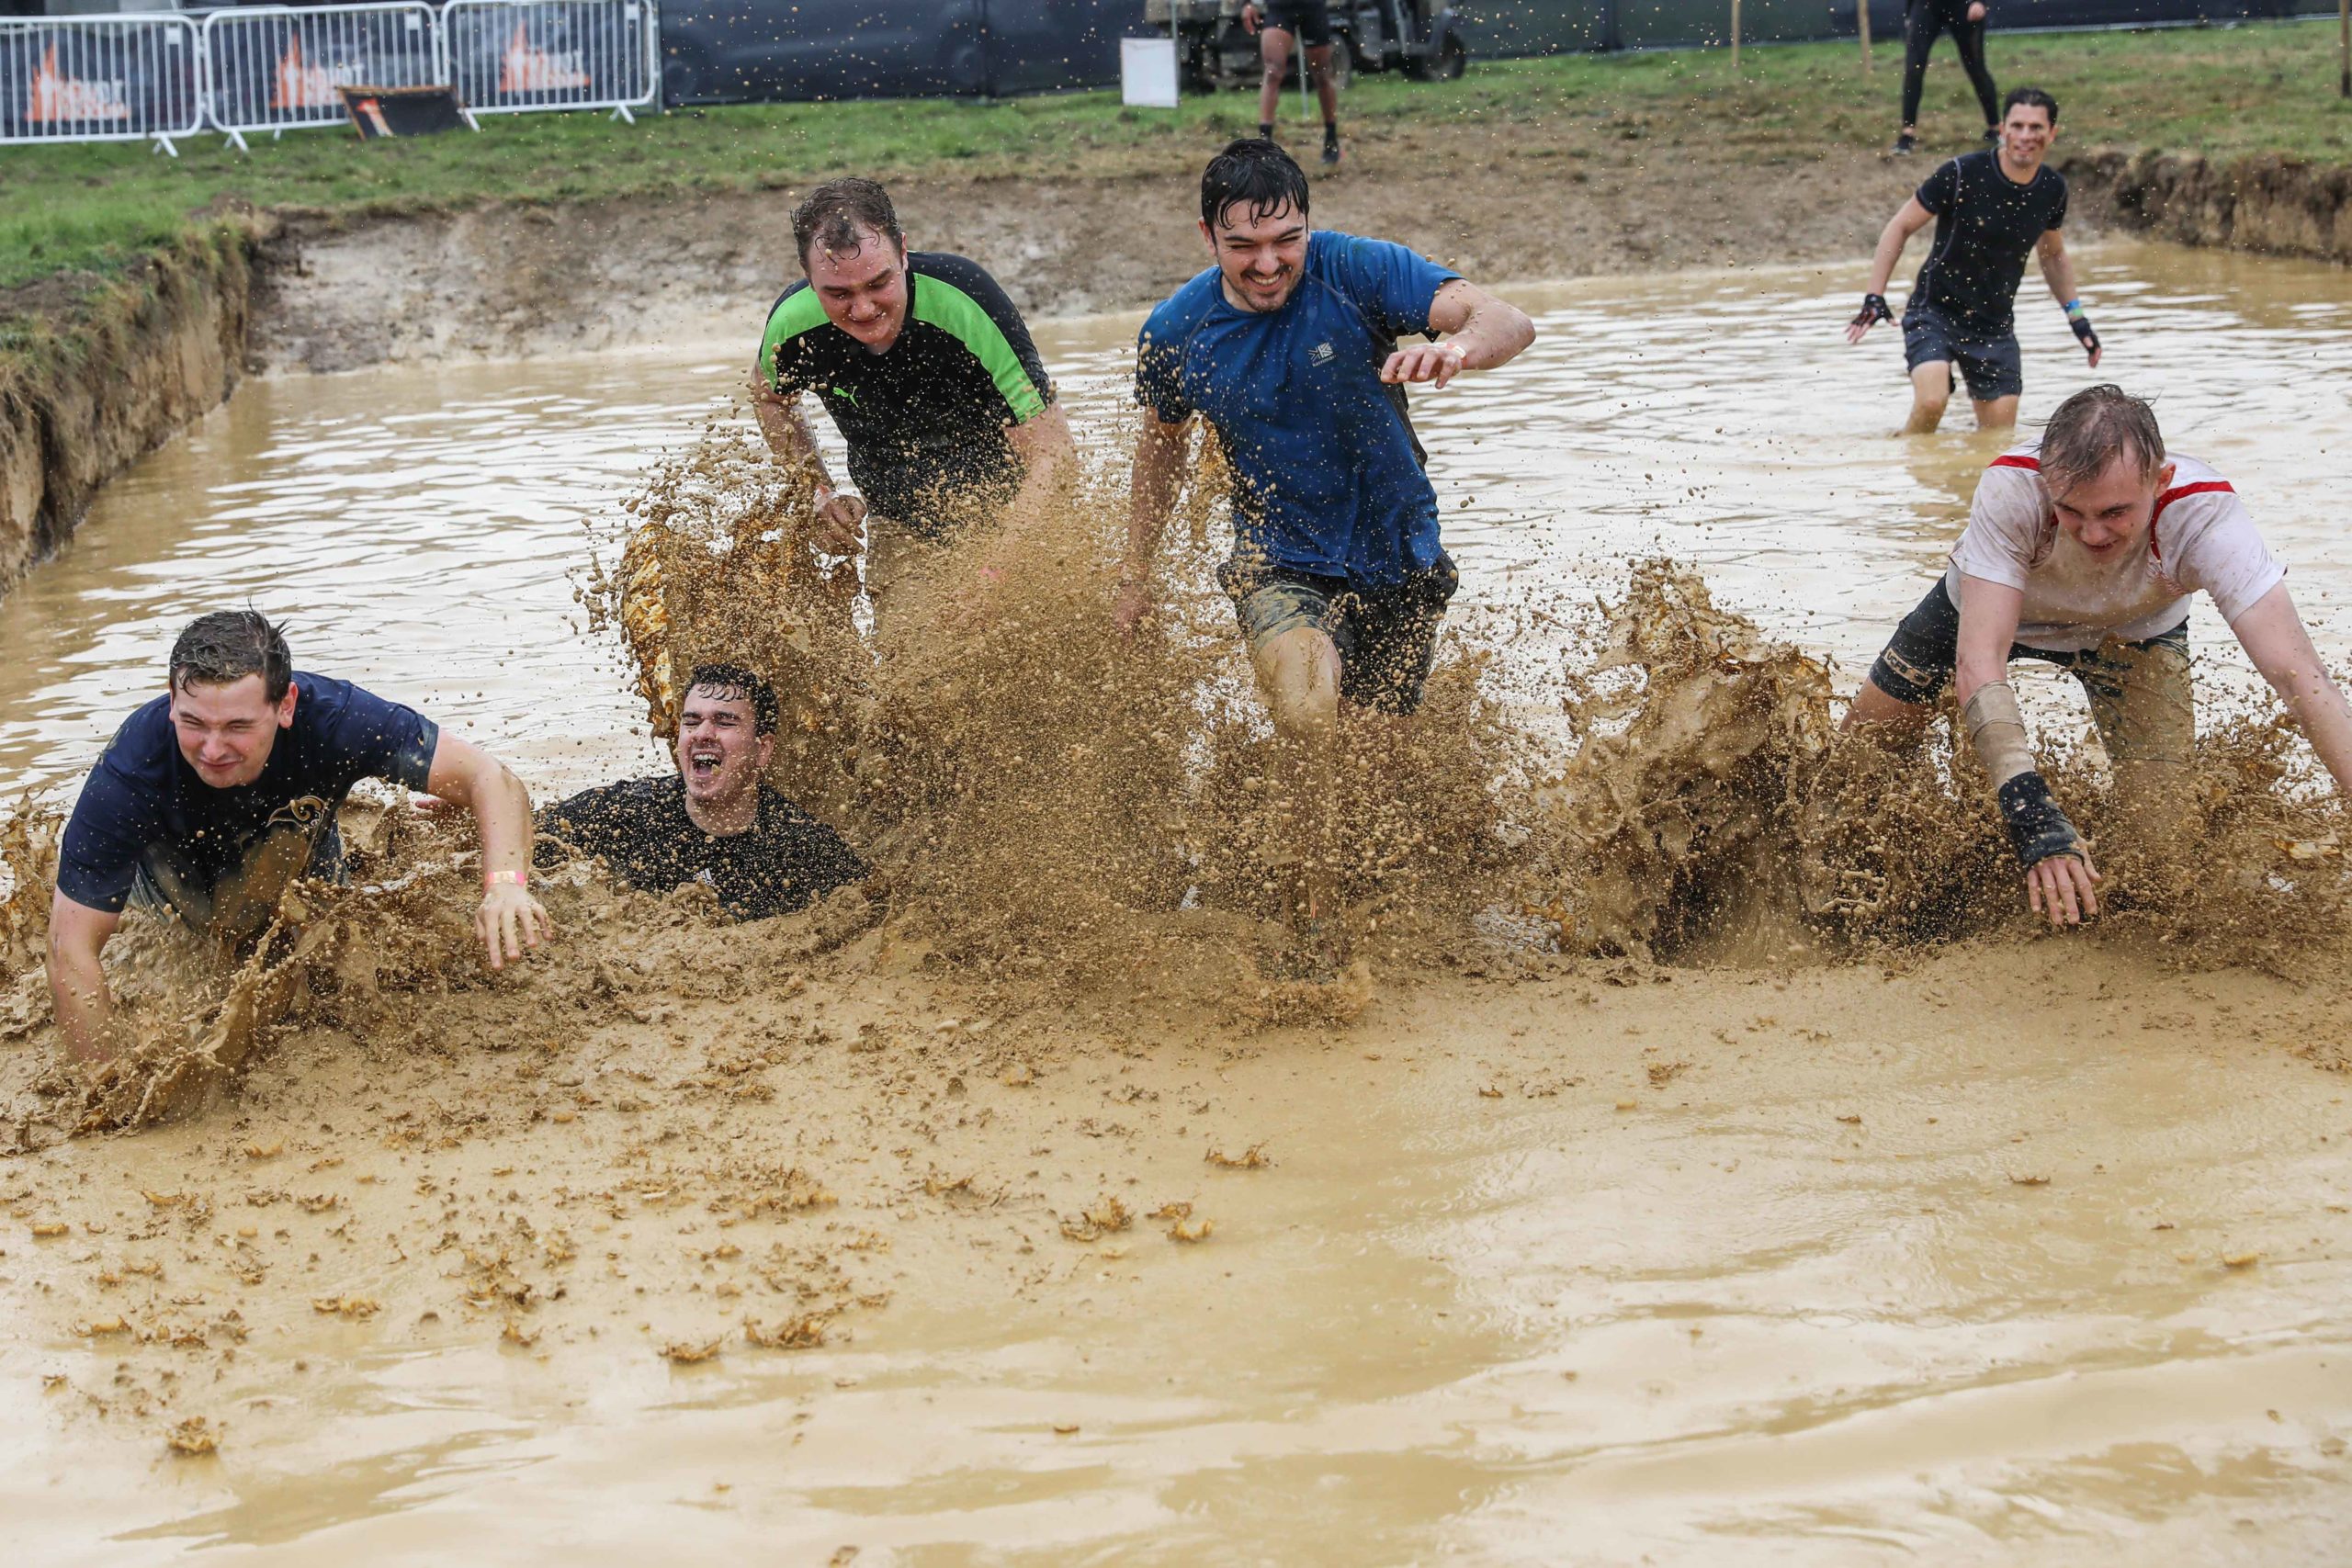 https://toughmudder.co.uk/wp-content/uploads/2021/09/eai_tmls_190921_oh_445-scaled.jpg